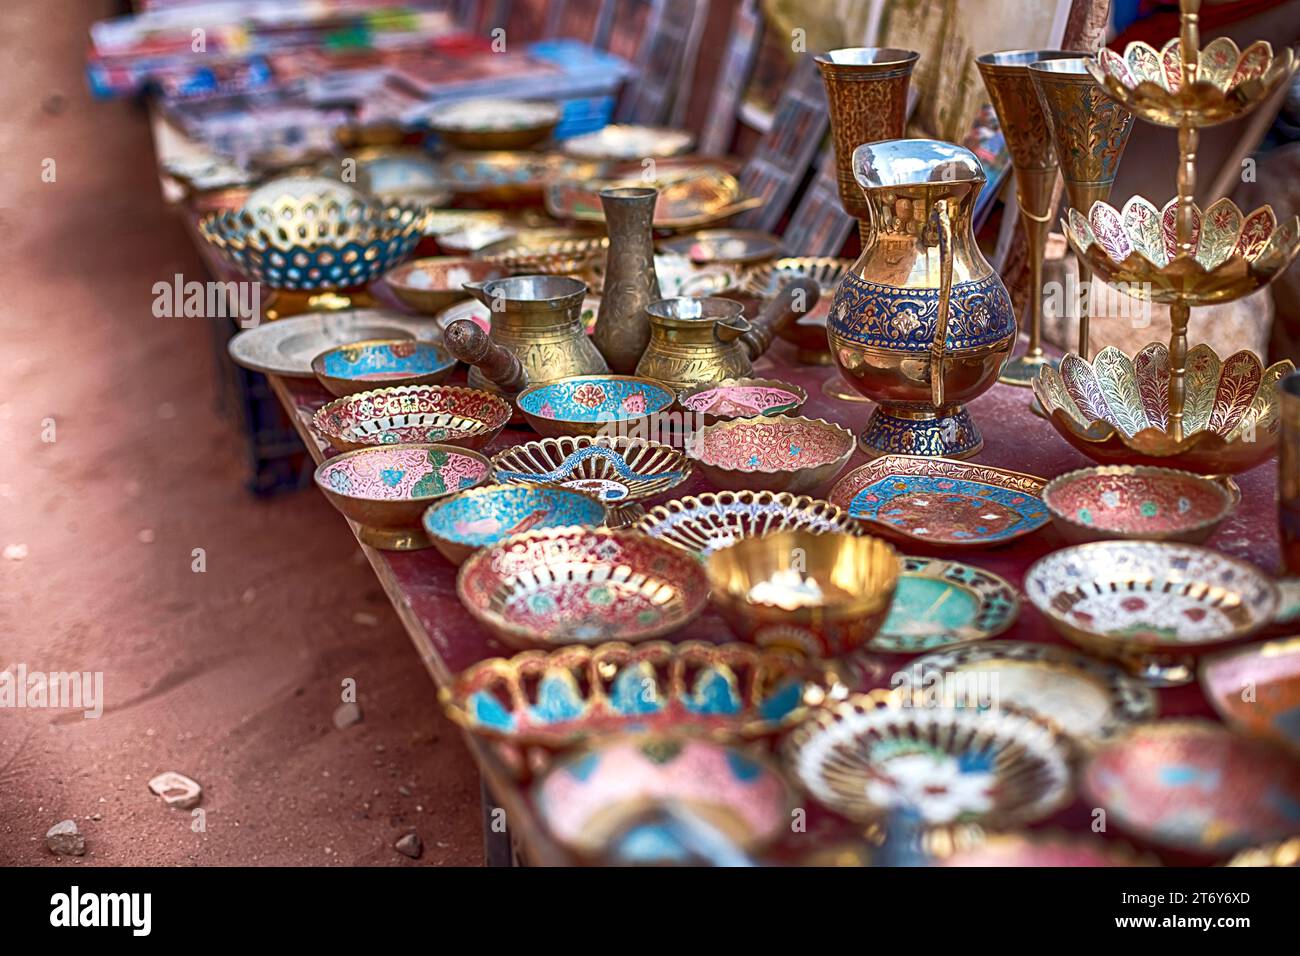 Close-up of souvenirs at an open-air store located along the Siq Canyon in Petra, Jordan. Stock Photo